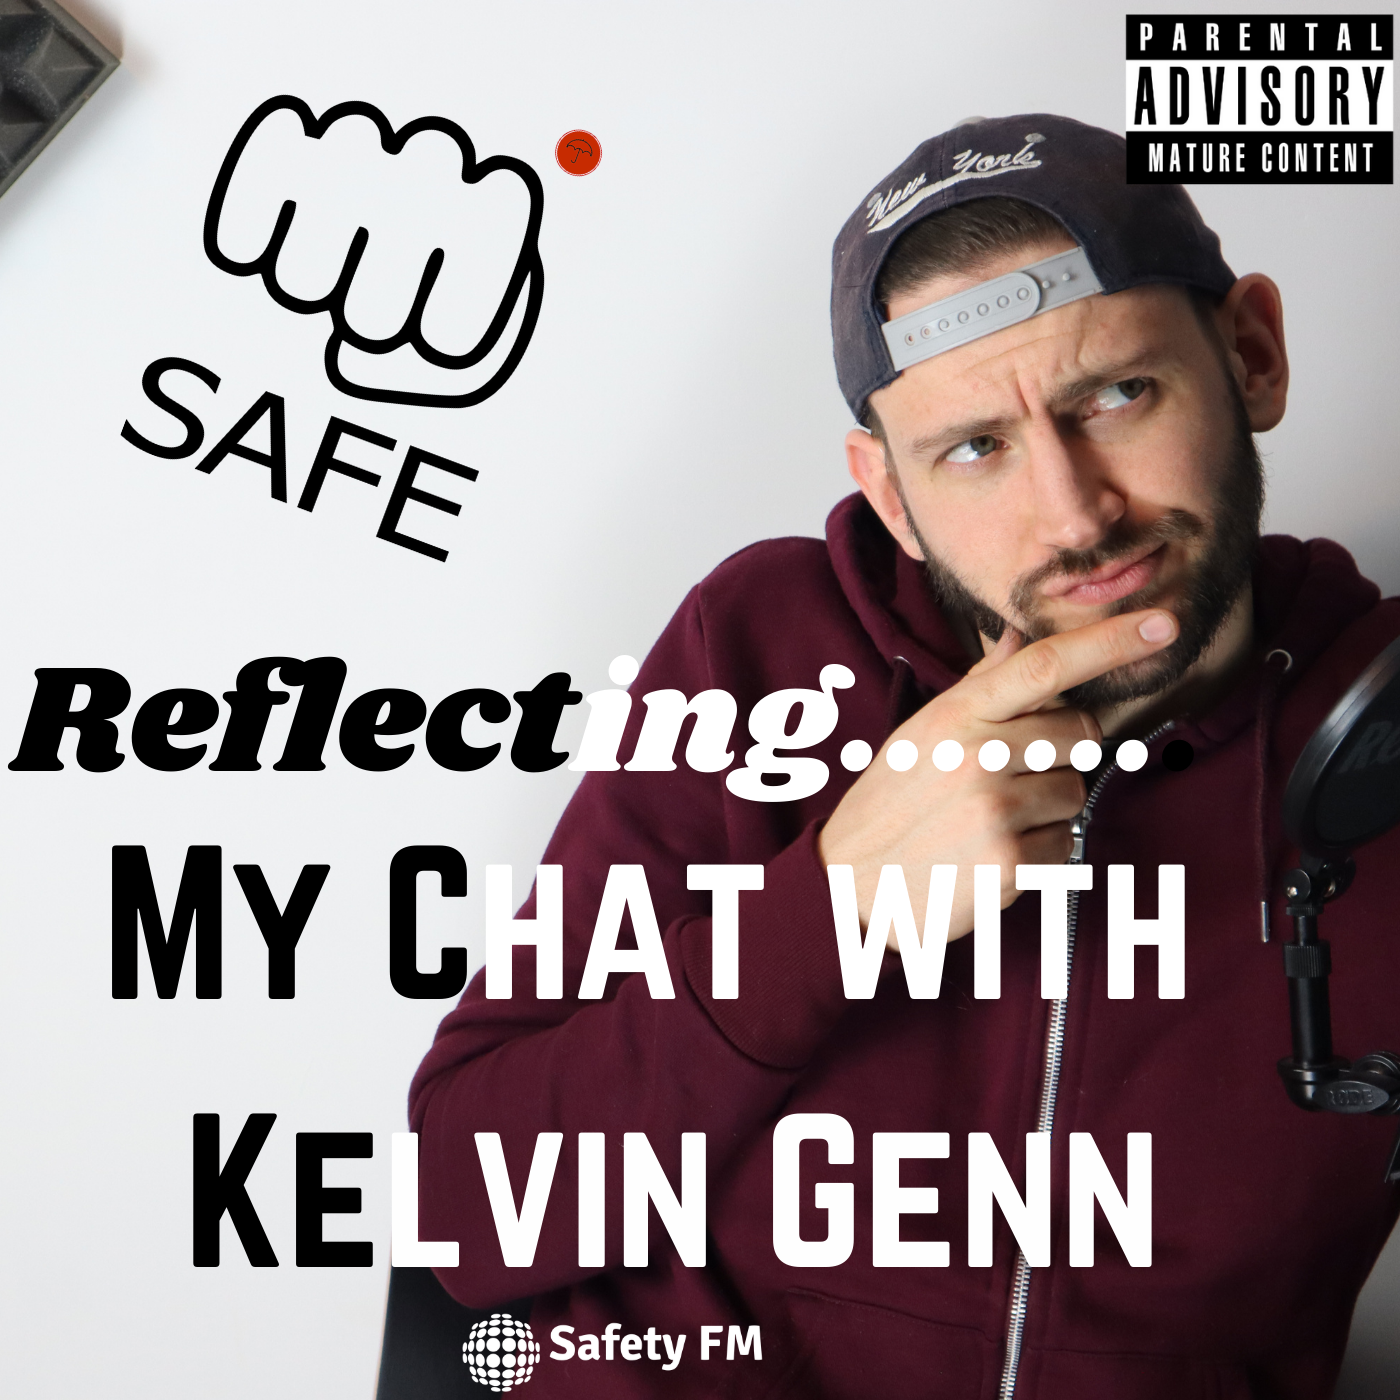 Reflecting on my chat with Kelvin Genn